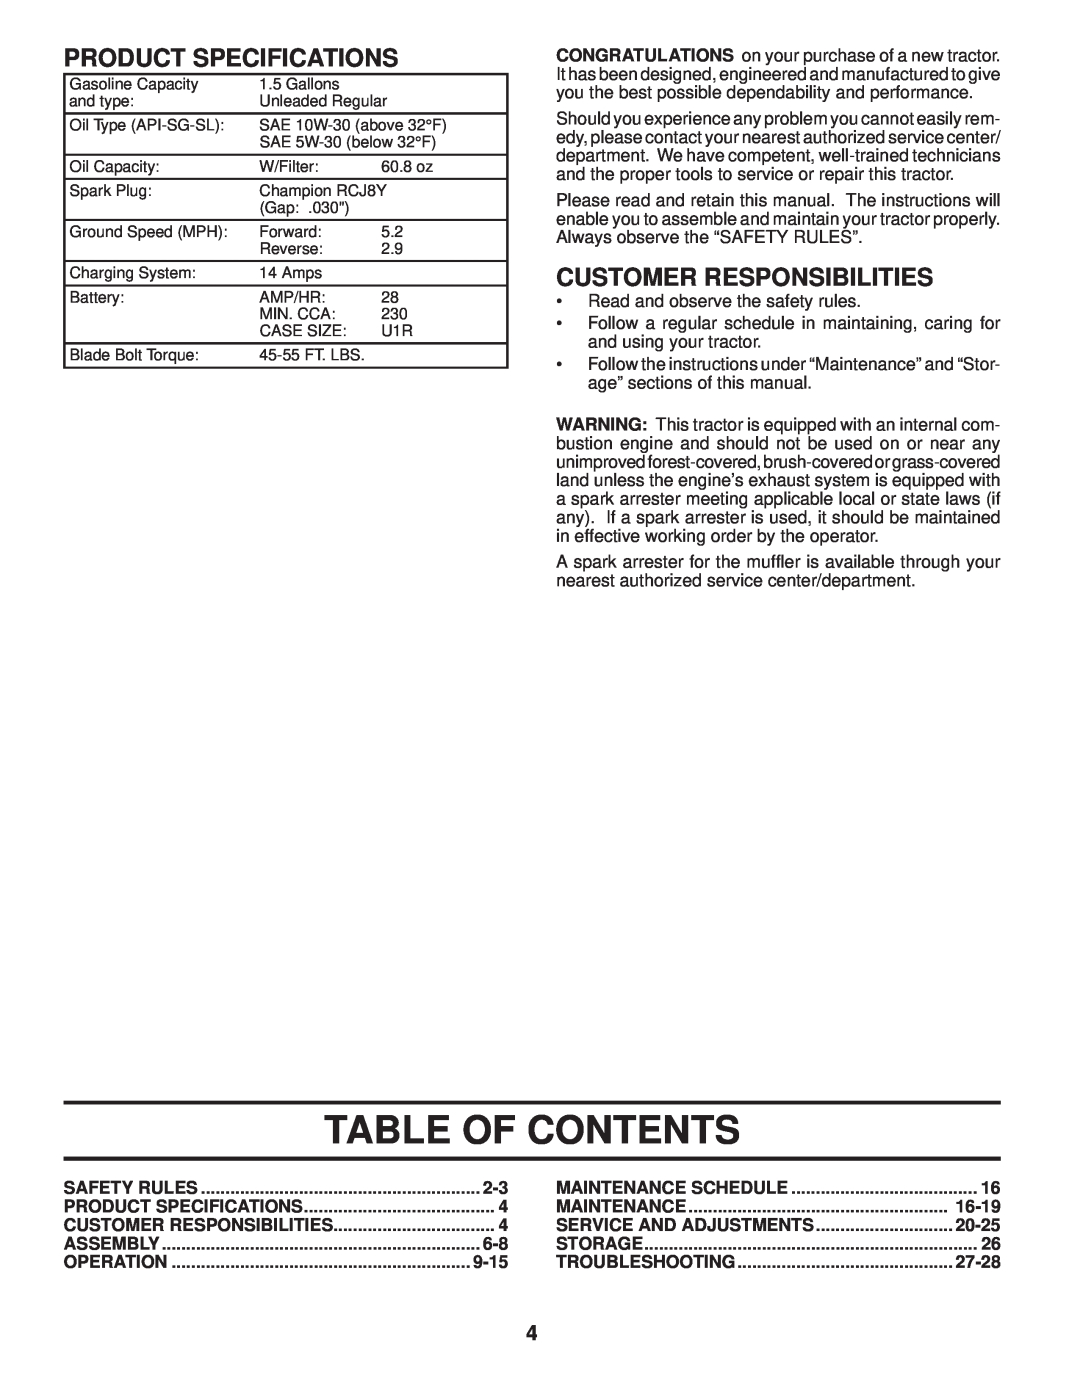 Husqvarna LTH1742T manual Table Of Contents, Product Specifications, Customer Responsibilities, 9-15, 16-19, 20-25, 27-28 